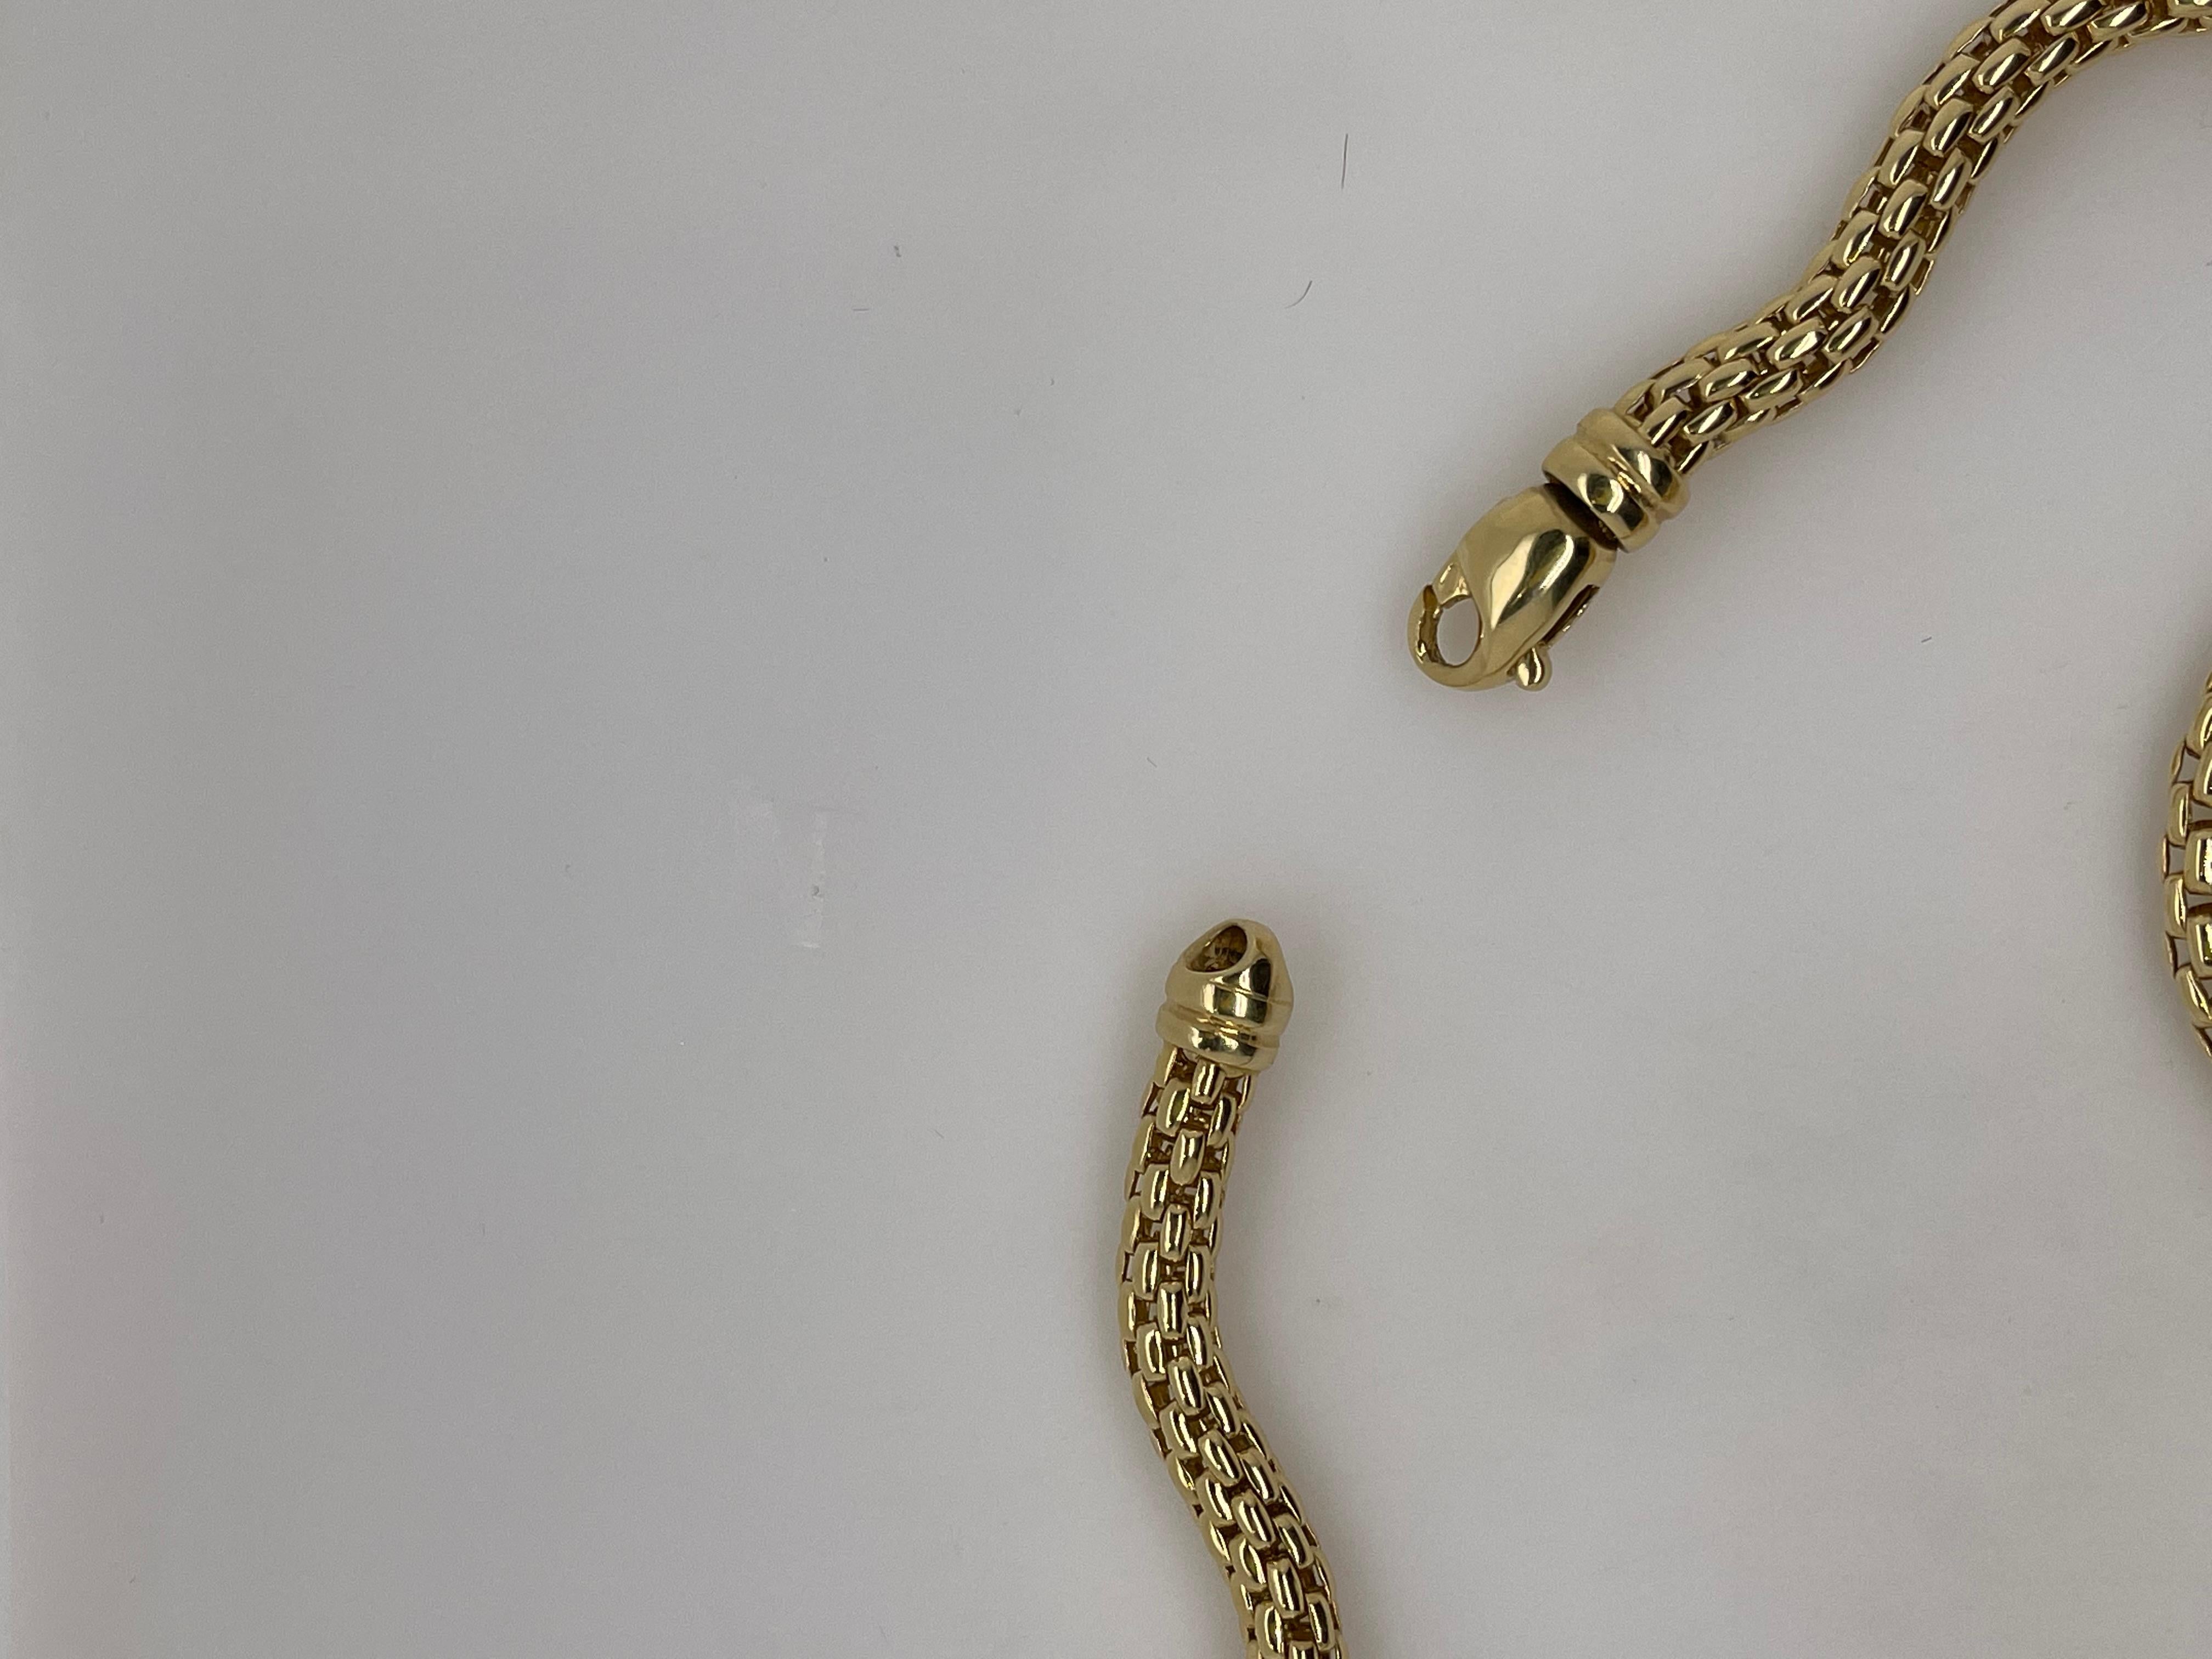 1 ounce gold chain